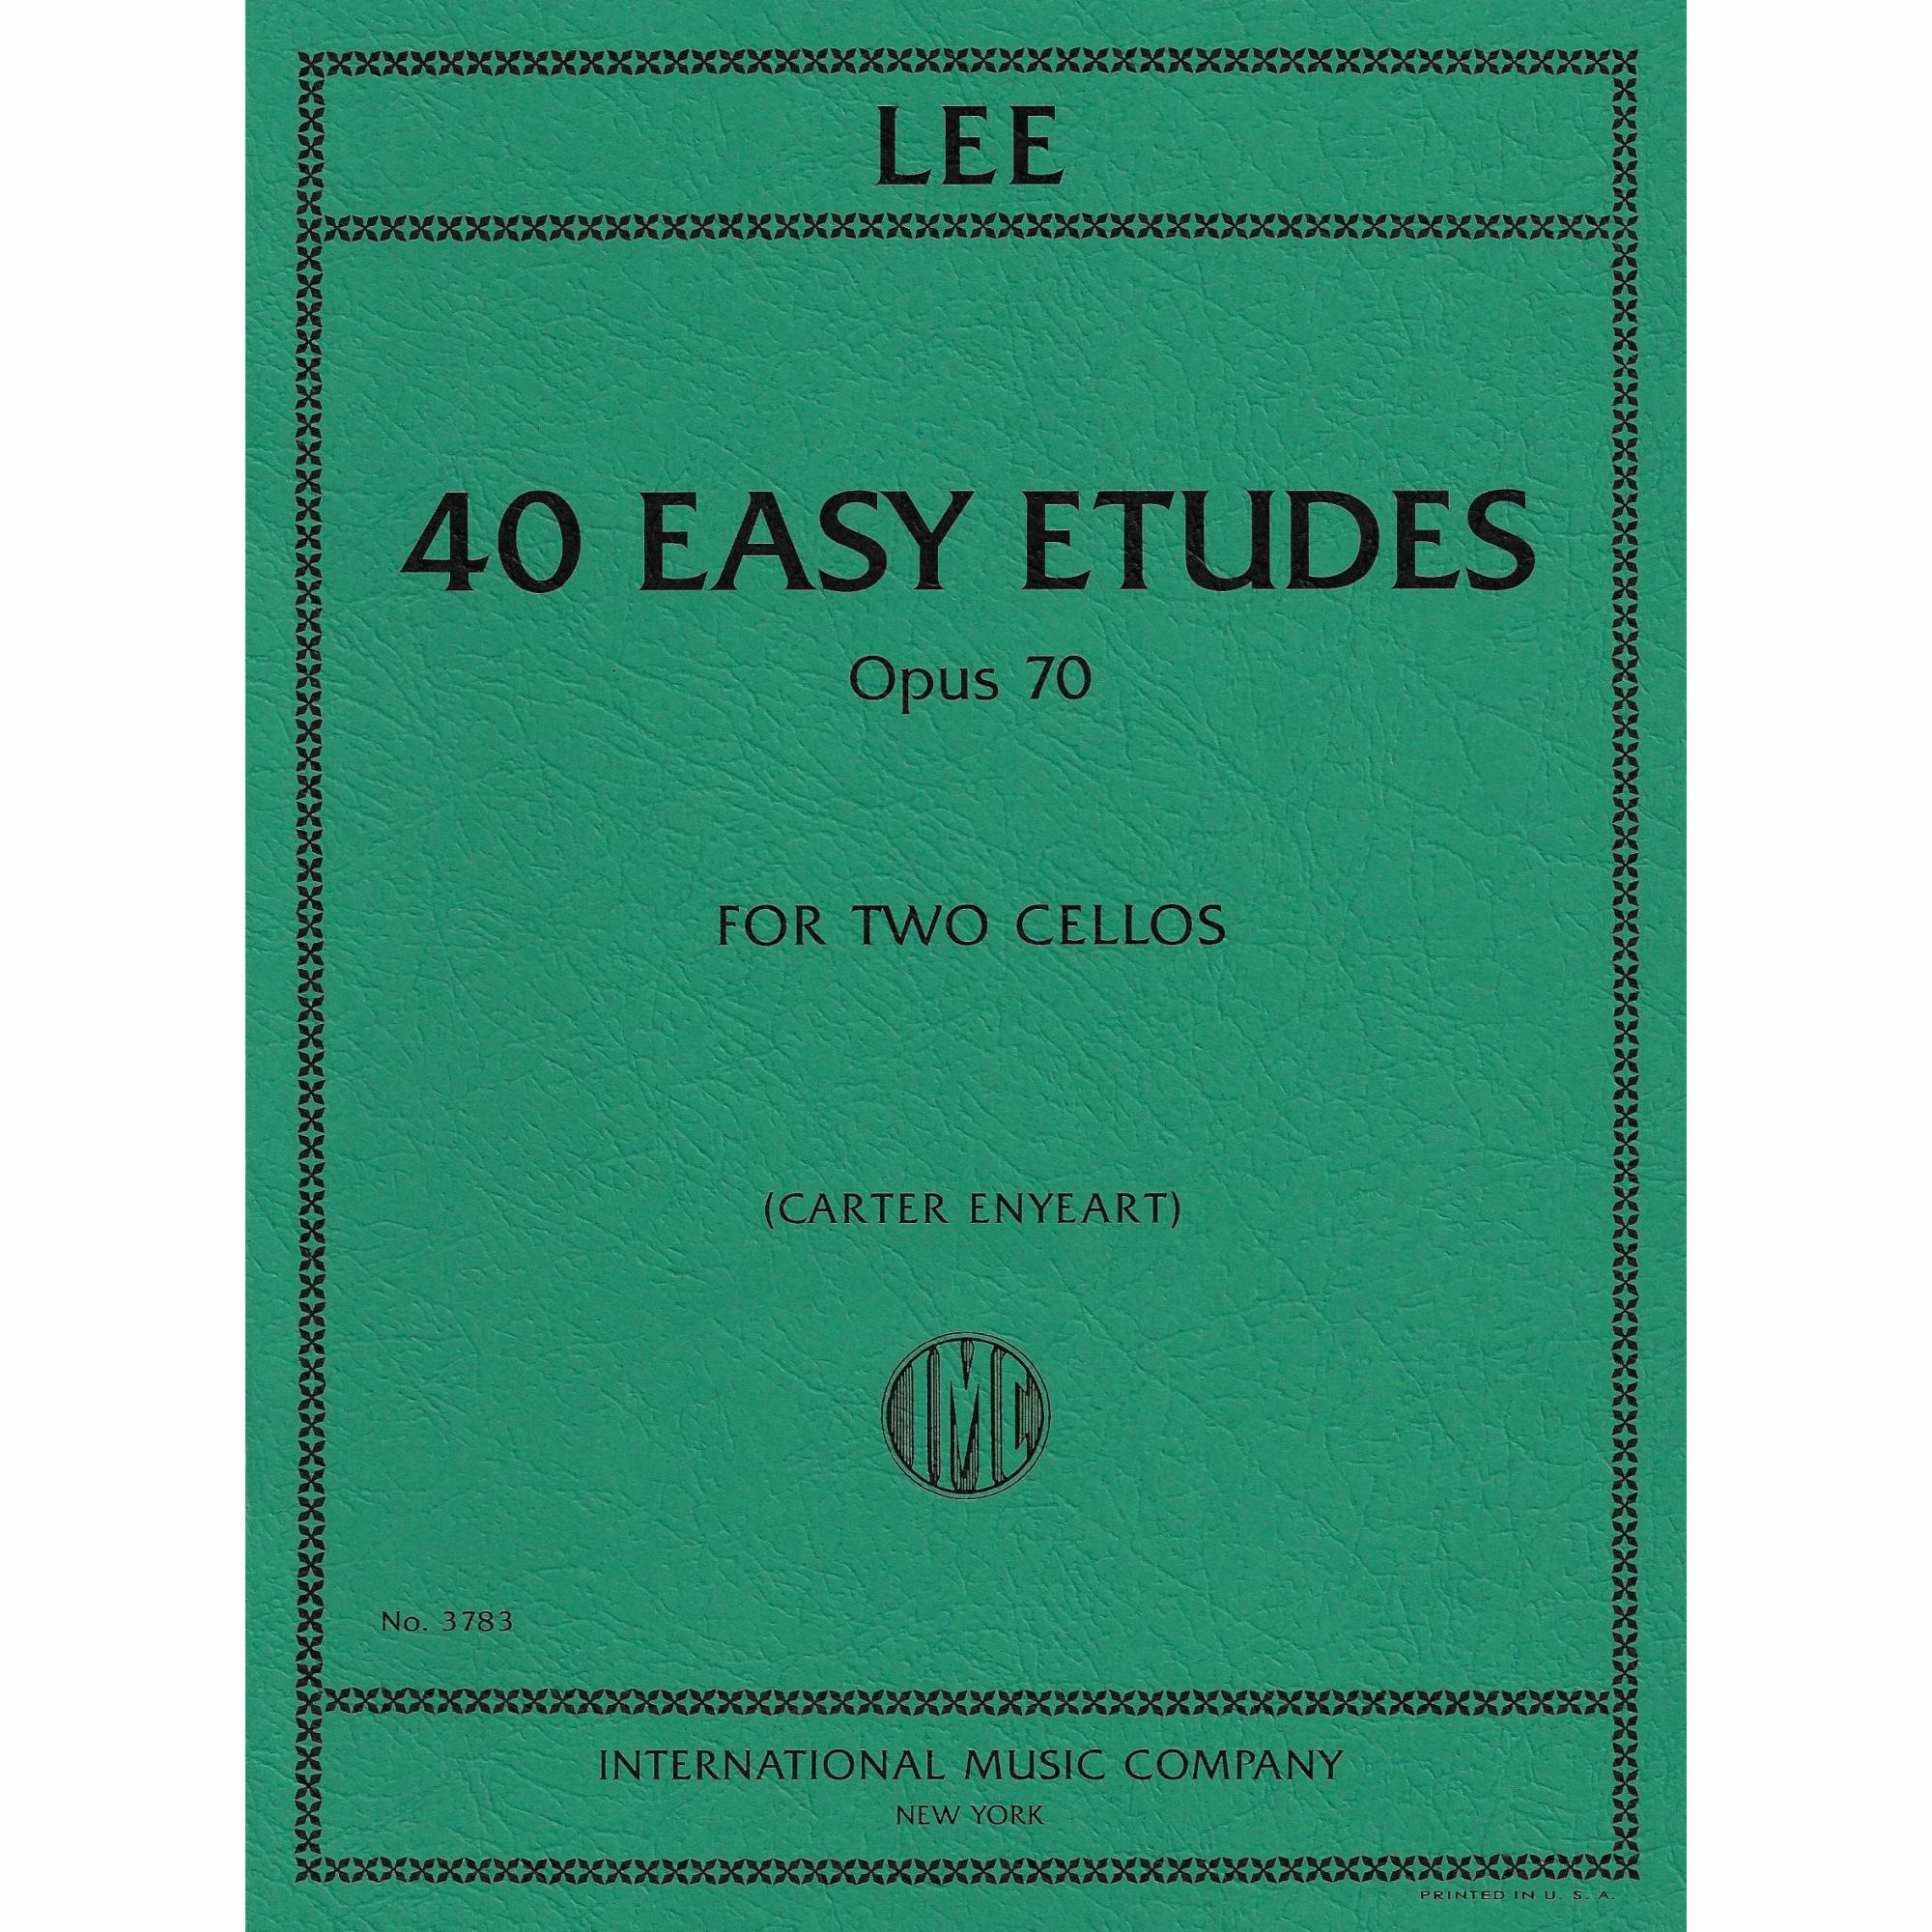 Lee -- 40 Easy Etudes, Op. 70 for Two Cellos